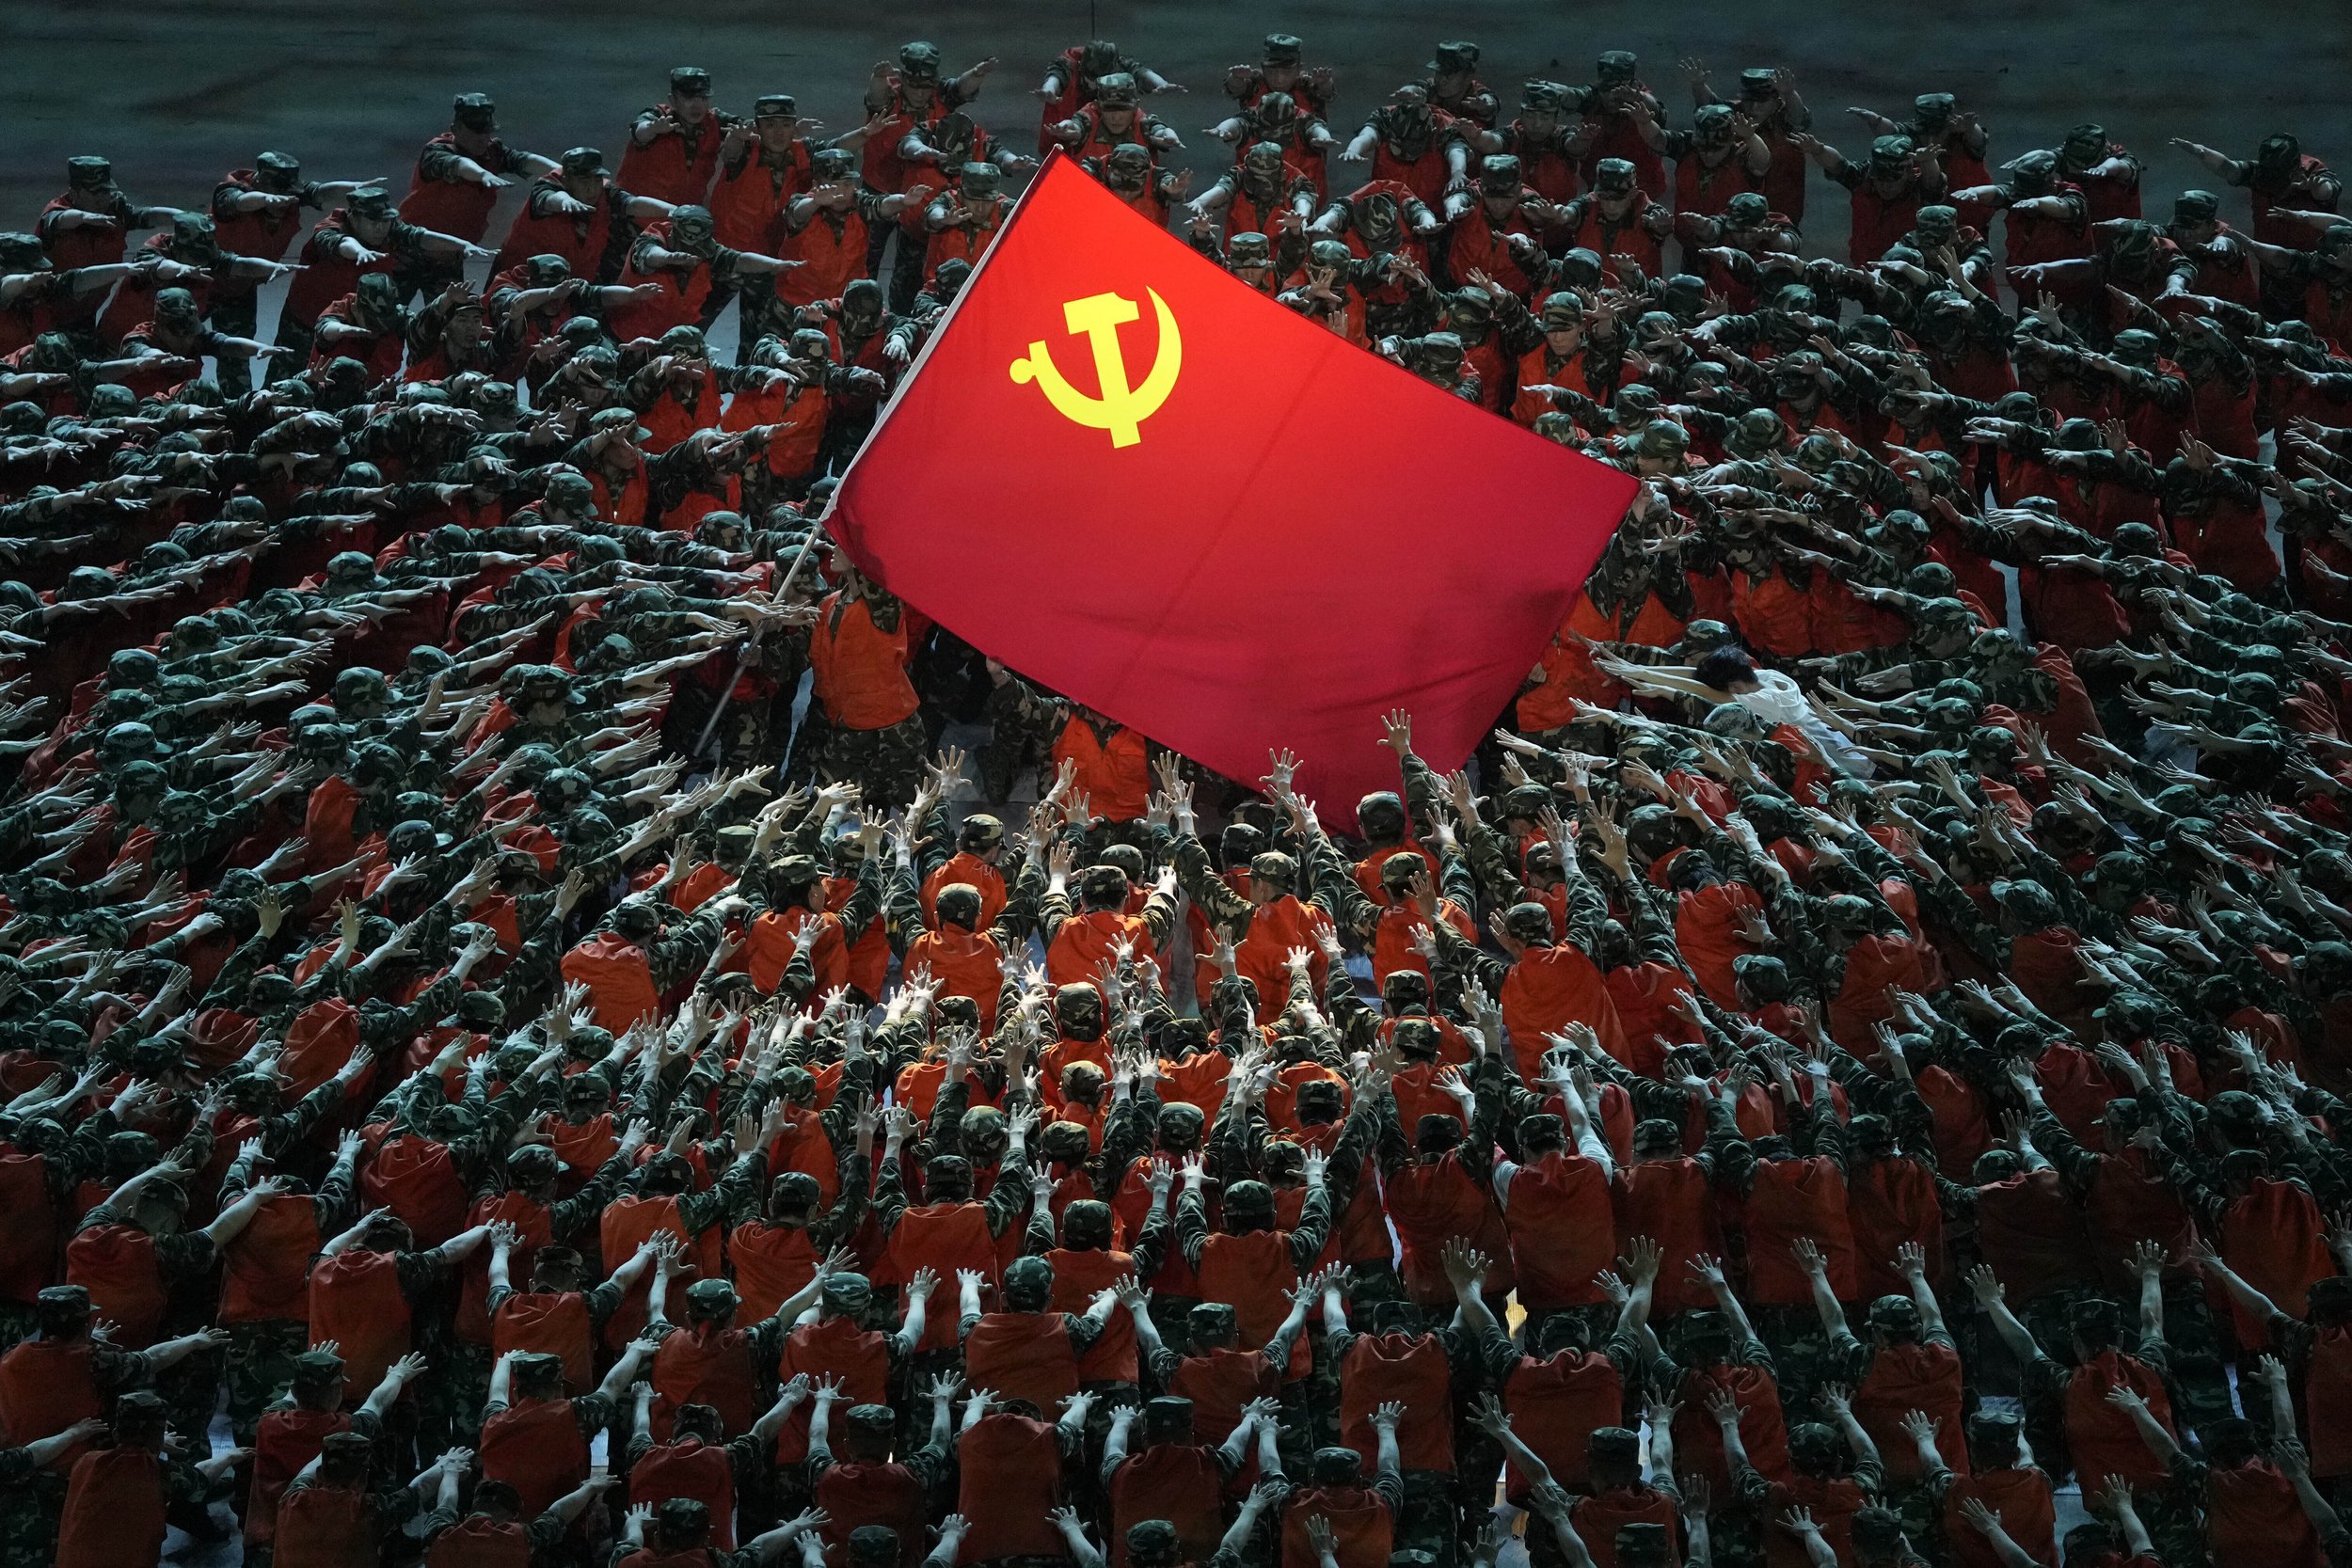  Performers dressed as rescue workers gather around the Communist Party flag during a gala show ahead of the 100th anniversary of the founding of the Chinese Communist Party in Beijing, on June 28, 2021. (AP Photo/Ng Han Guan) 